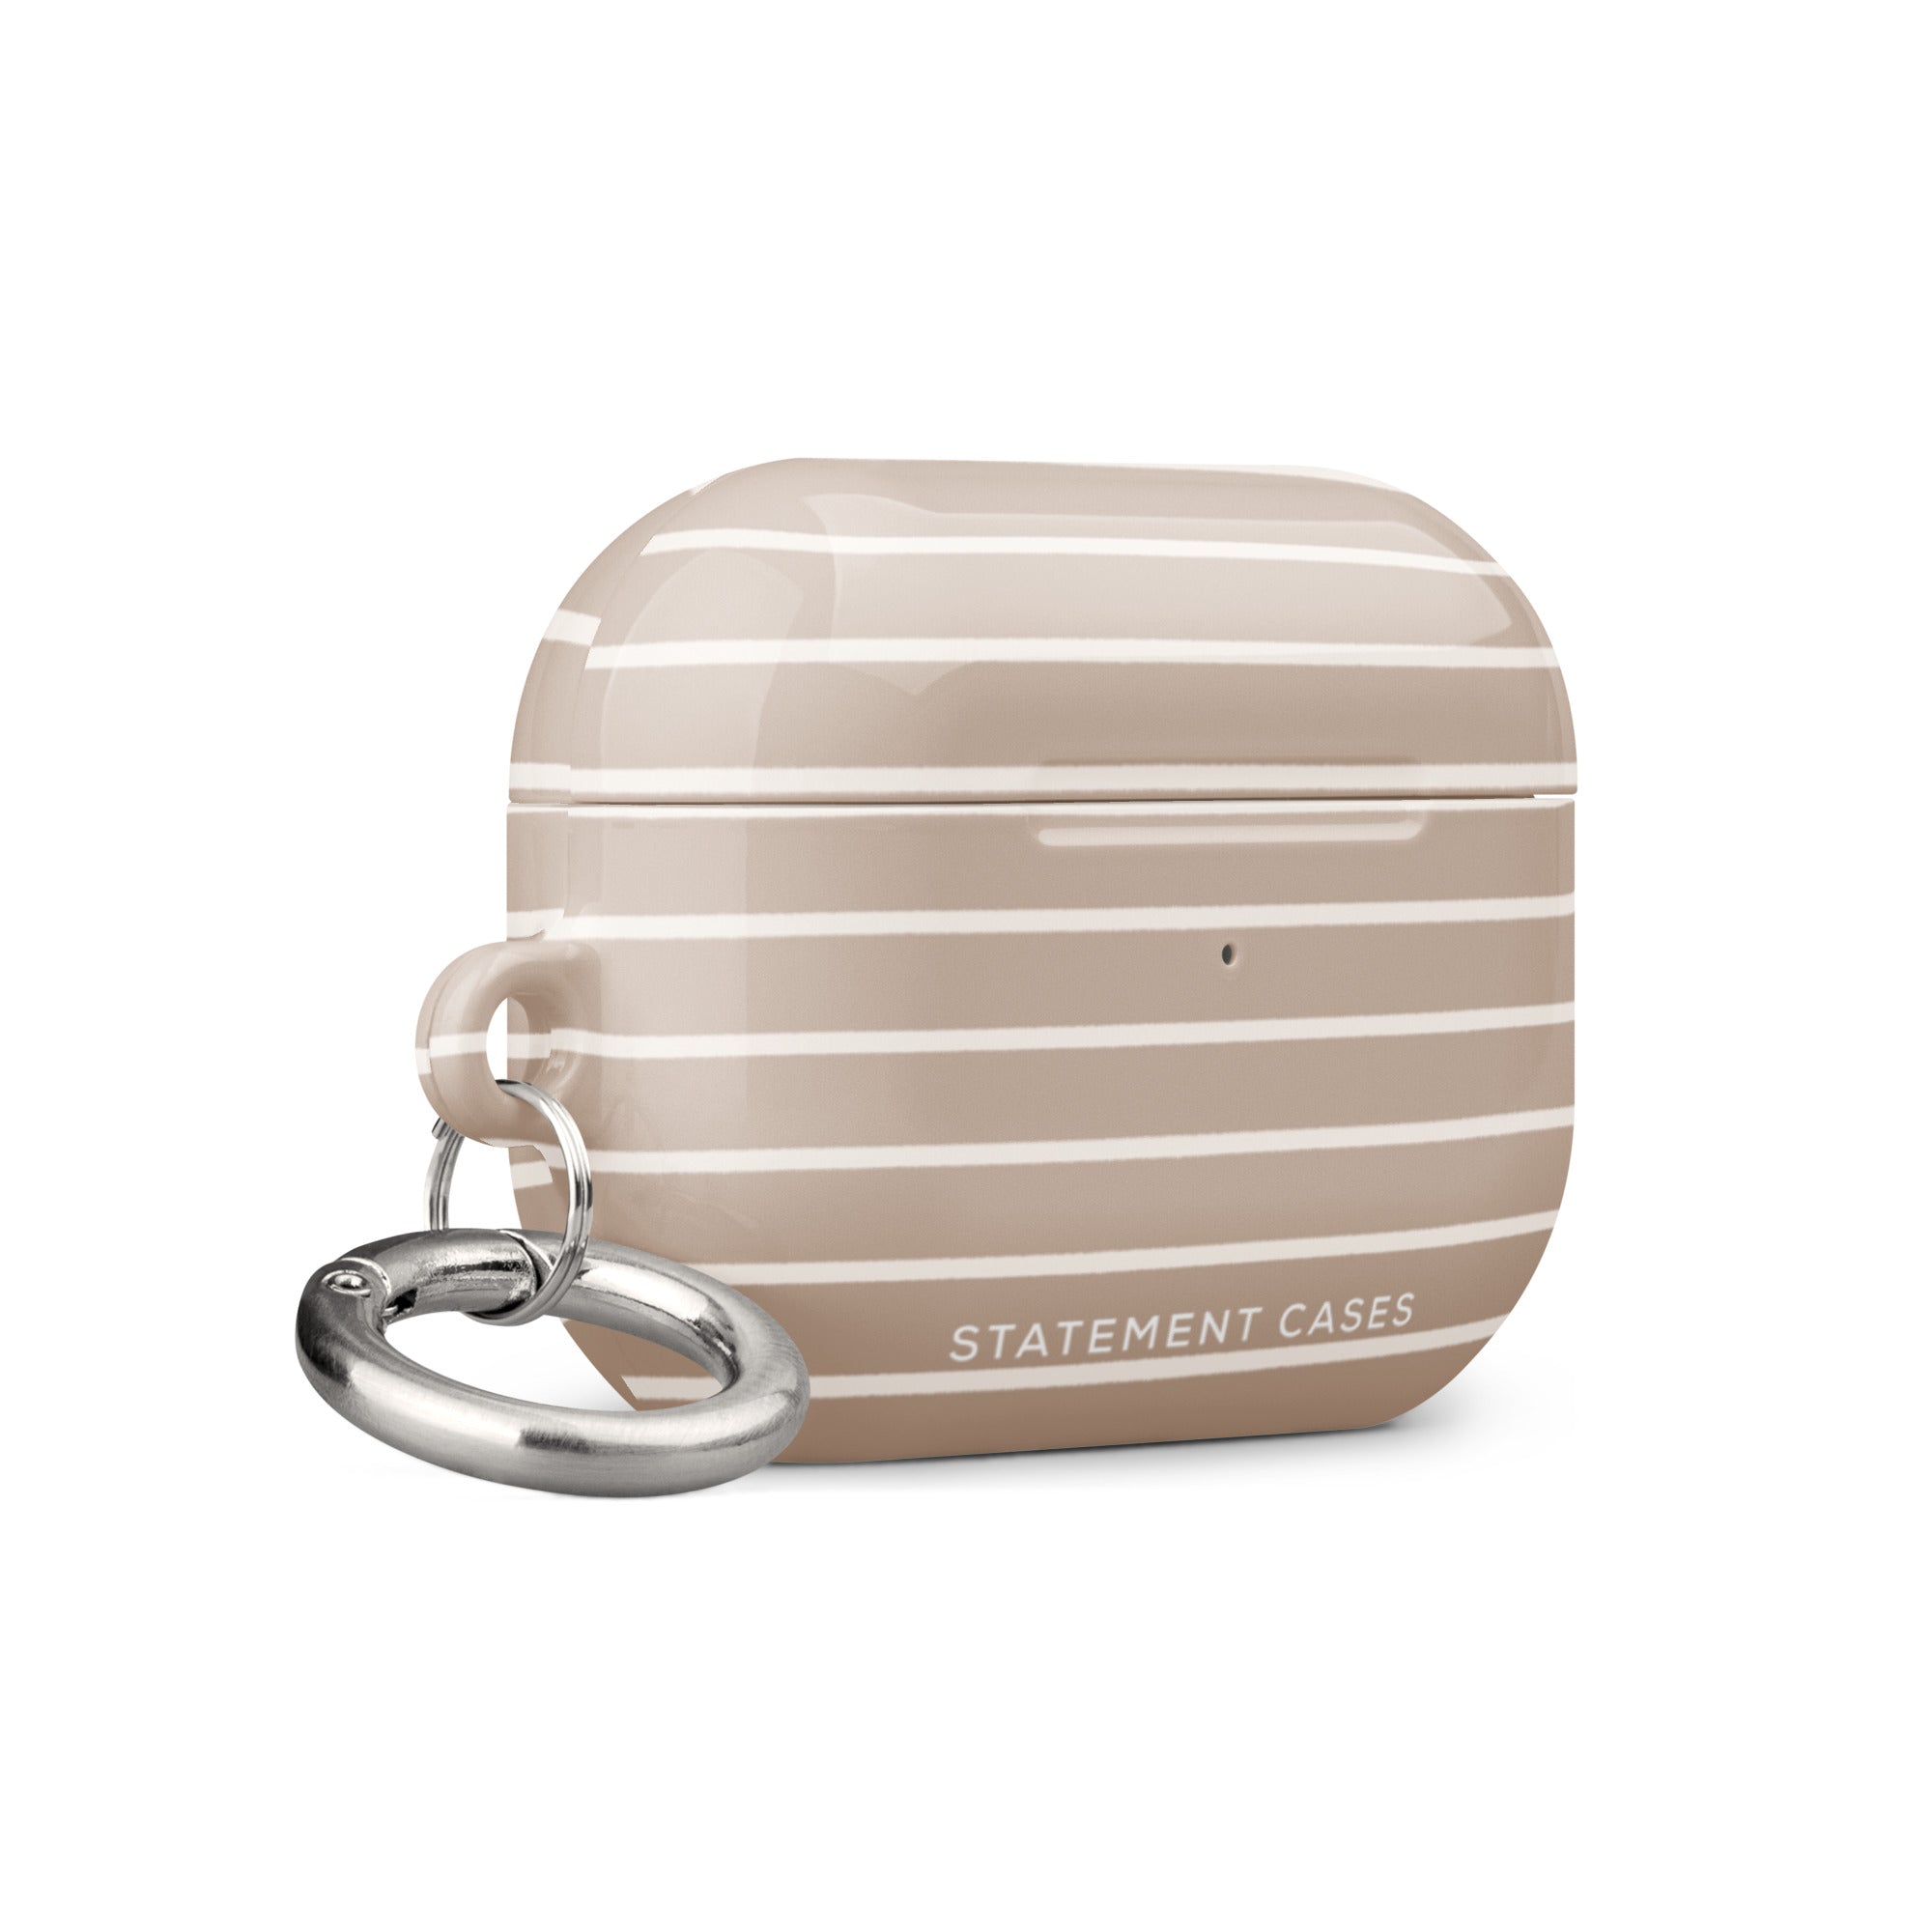 A beige Au Naturale for AirPods Pro Gen 2 case with horizontal white stripes and a small keychain loop on the side. Crafted from impact-absorbing material, the case also features a metal carabiner for added convenience. The text "Statement Cases" appears near the bottom. The case has a smooth, glossy finish.